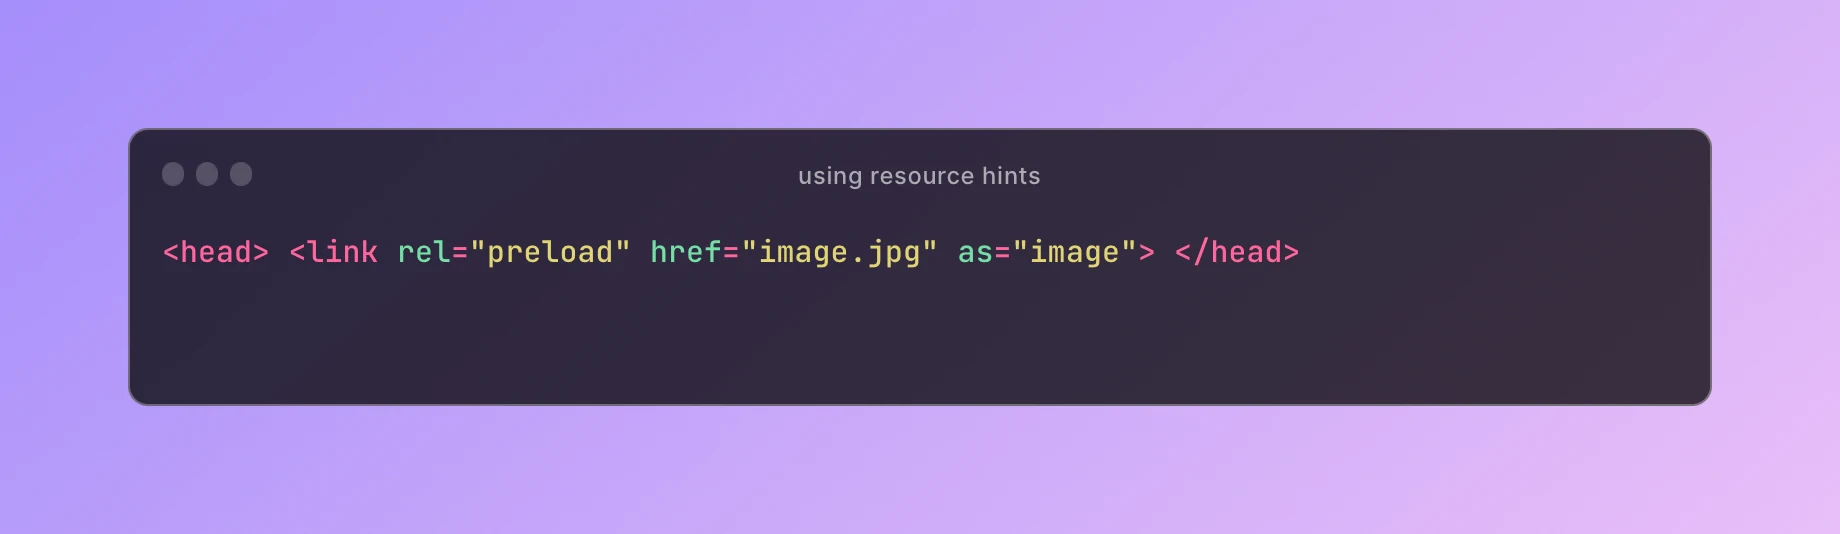 Optimizing images with resource hints